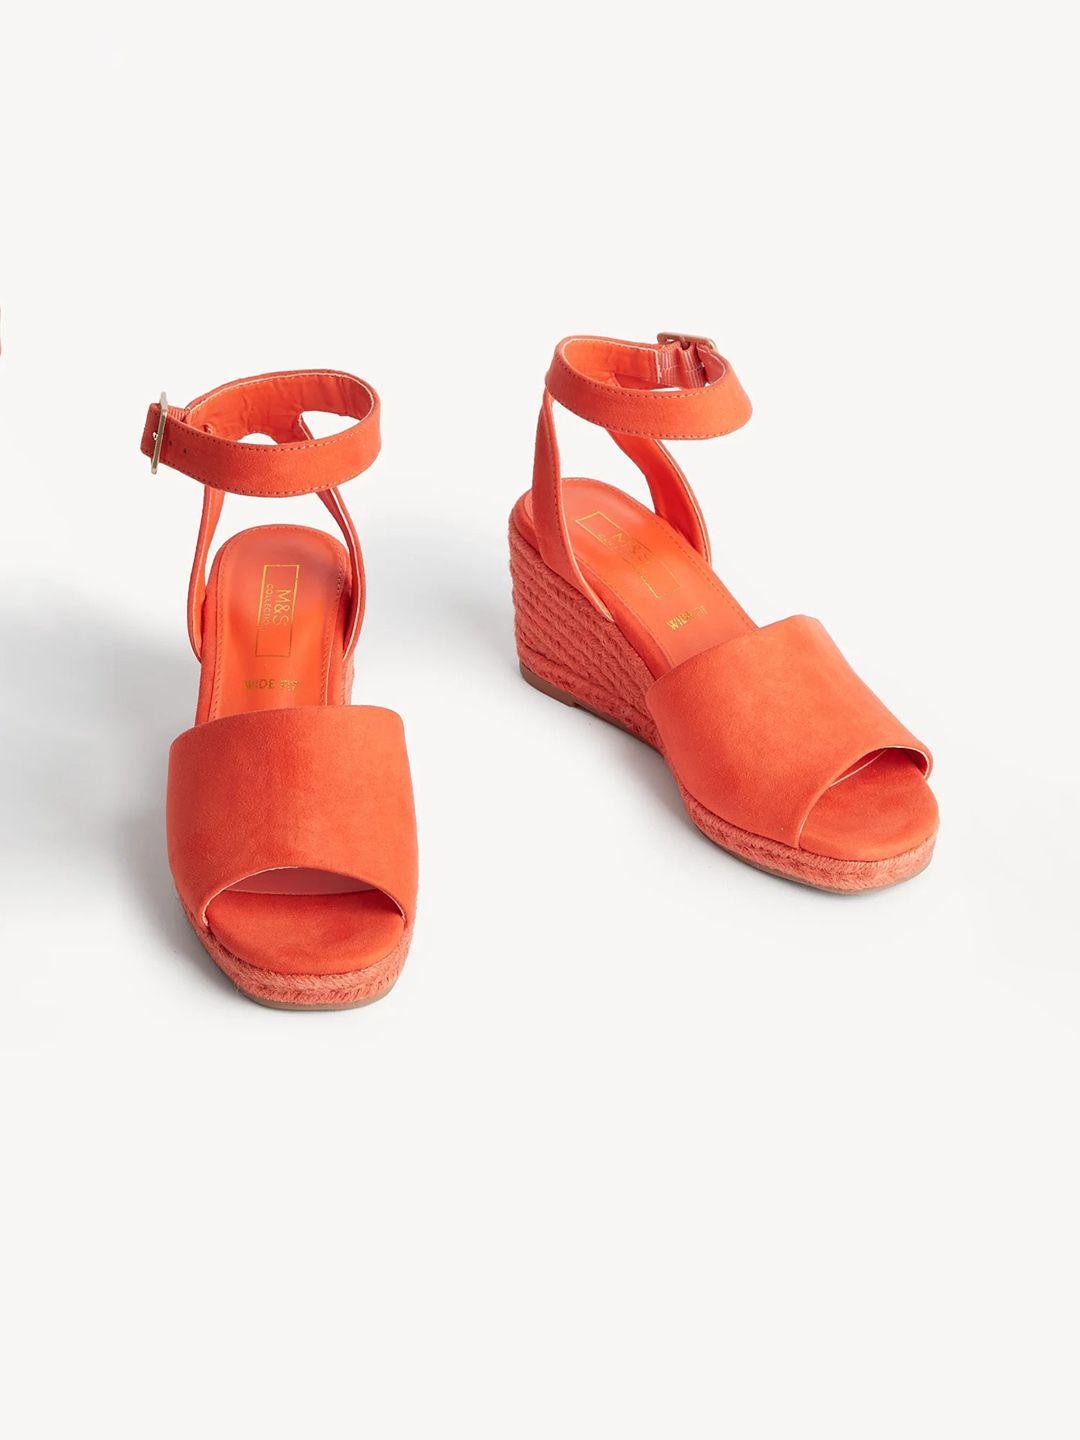 marks-&-spencer-open-toe-wedges-with-ankle-loop